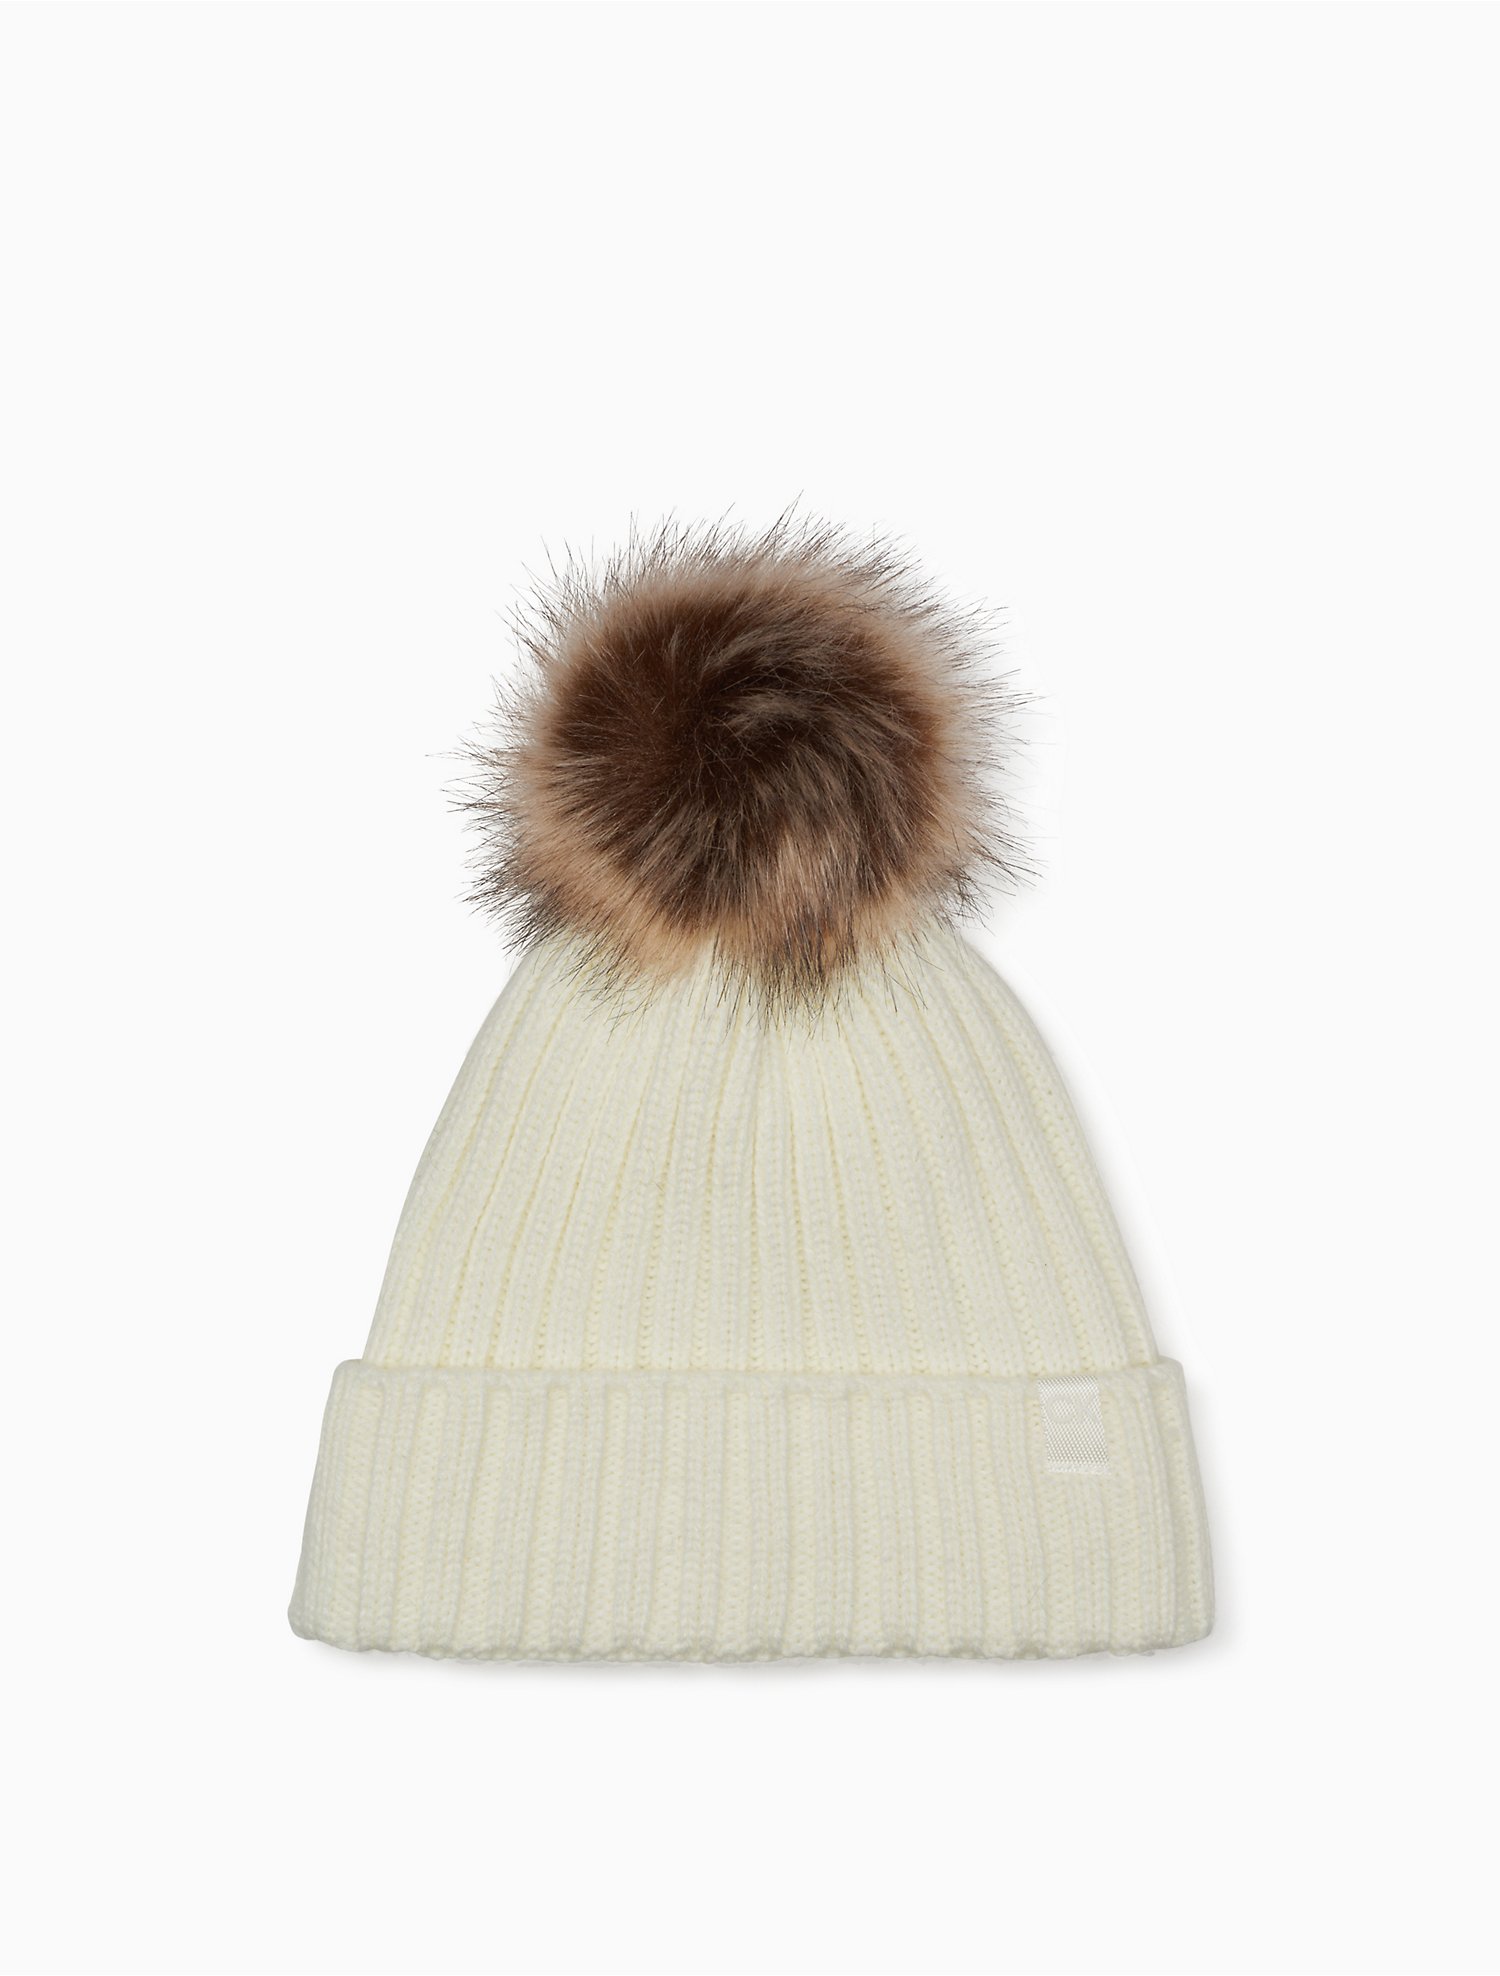 Knit Beanie Hat with Fur Pom in Off-white Color 